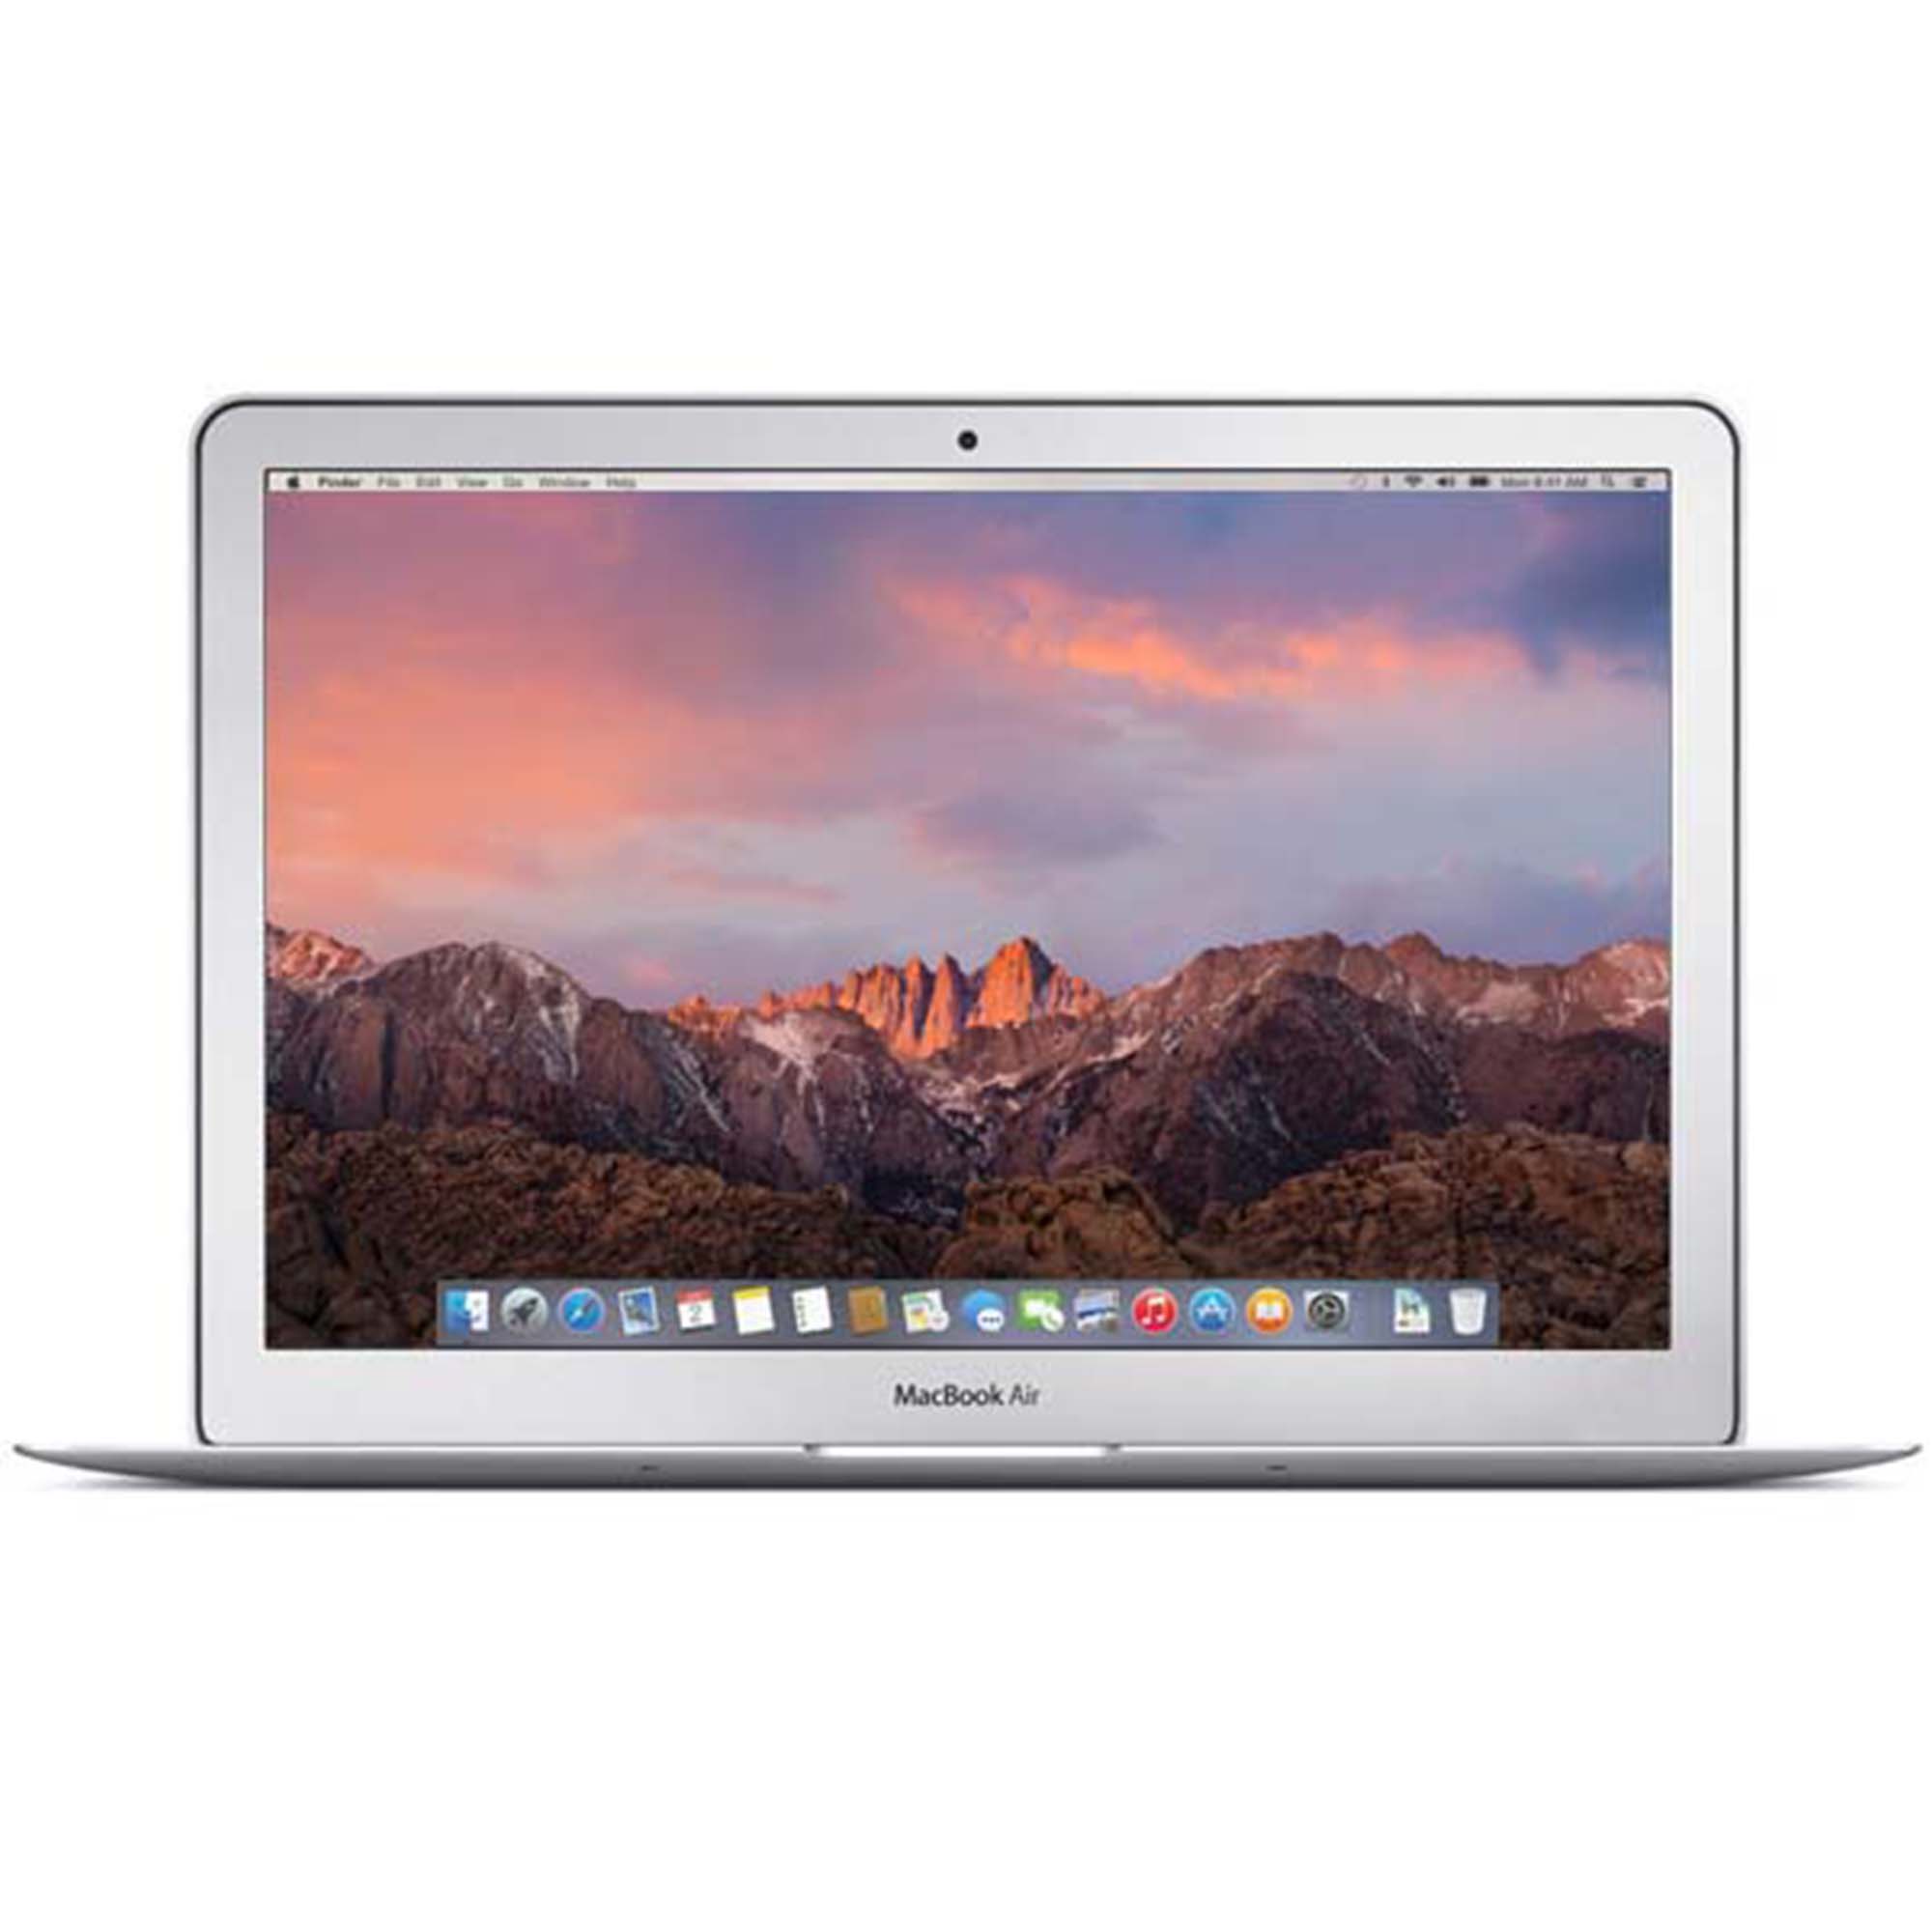 Restored 13" Apple MacBook Air 1.8GHz Dual Core i5 4GB Memory / 256GB SSD (Turbo Boost to 2.8GHz) (Refurbished) - image 1 of 5